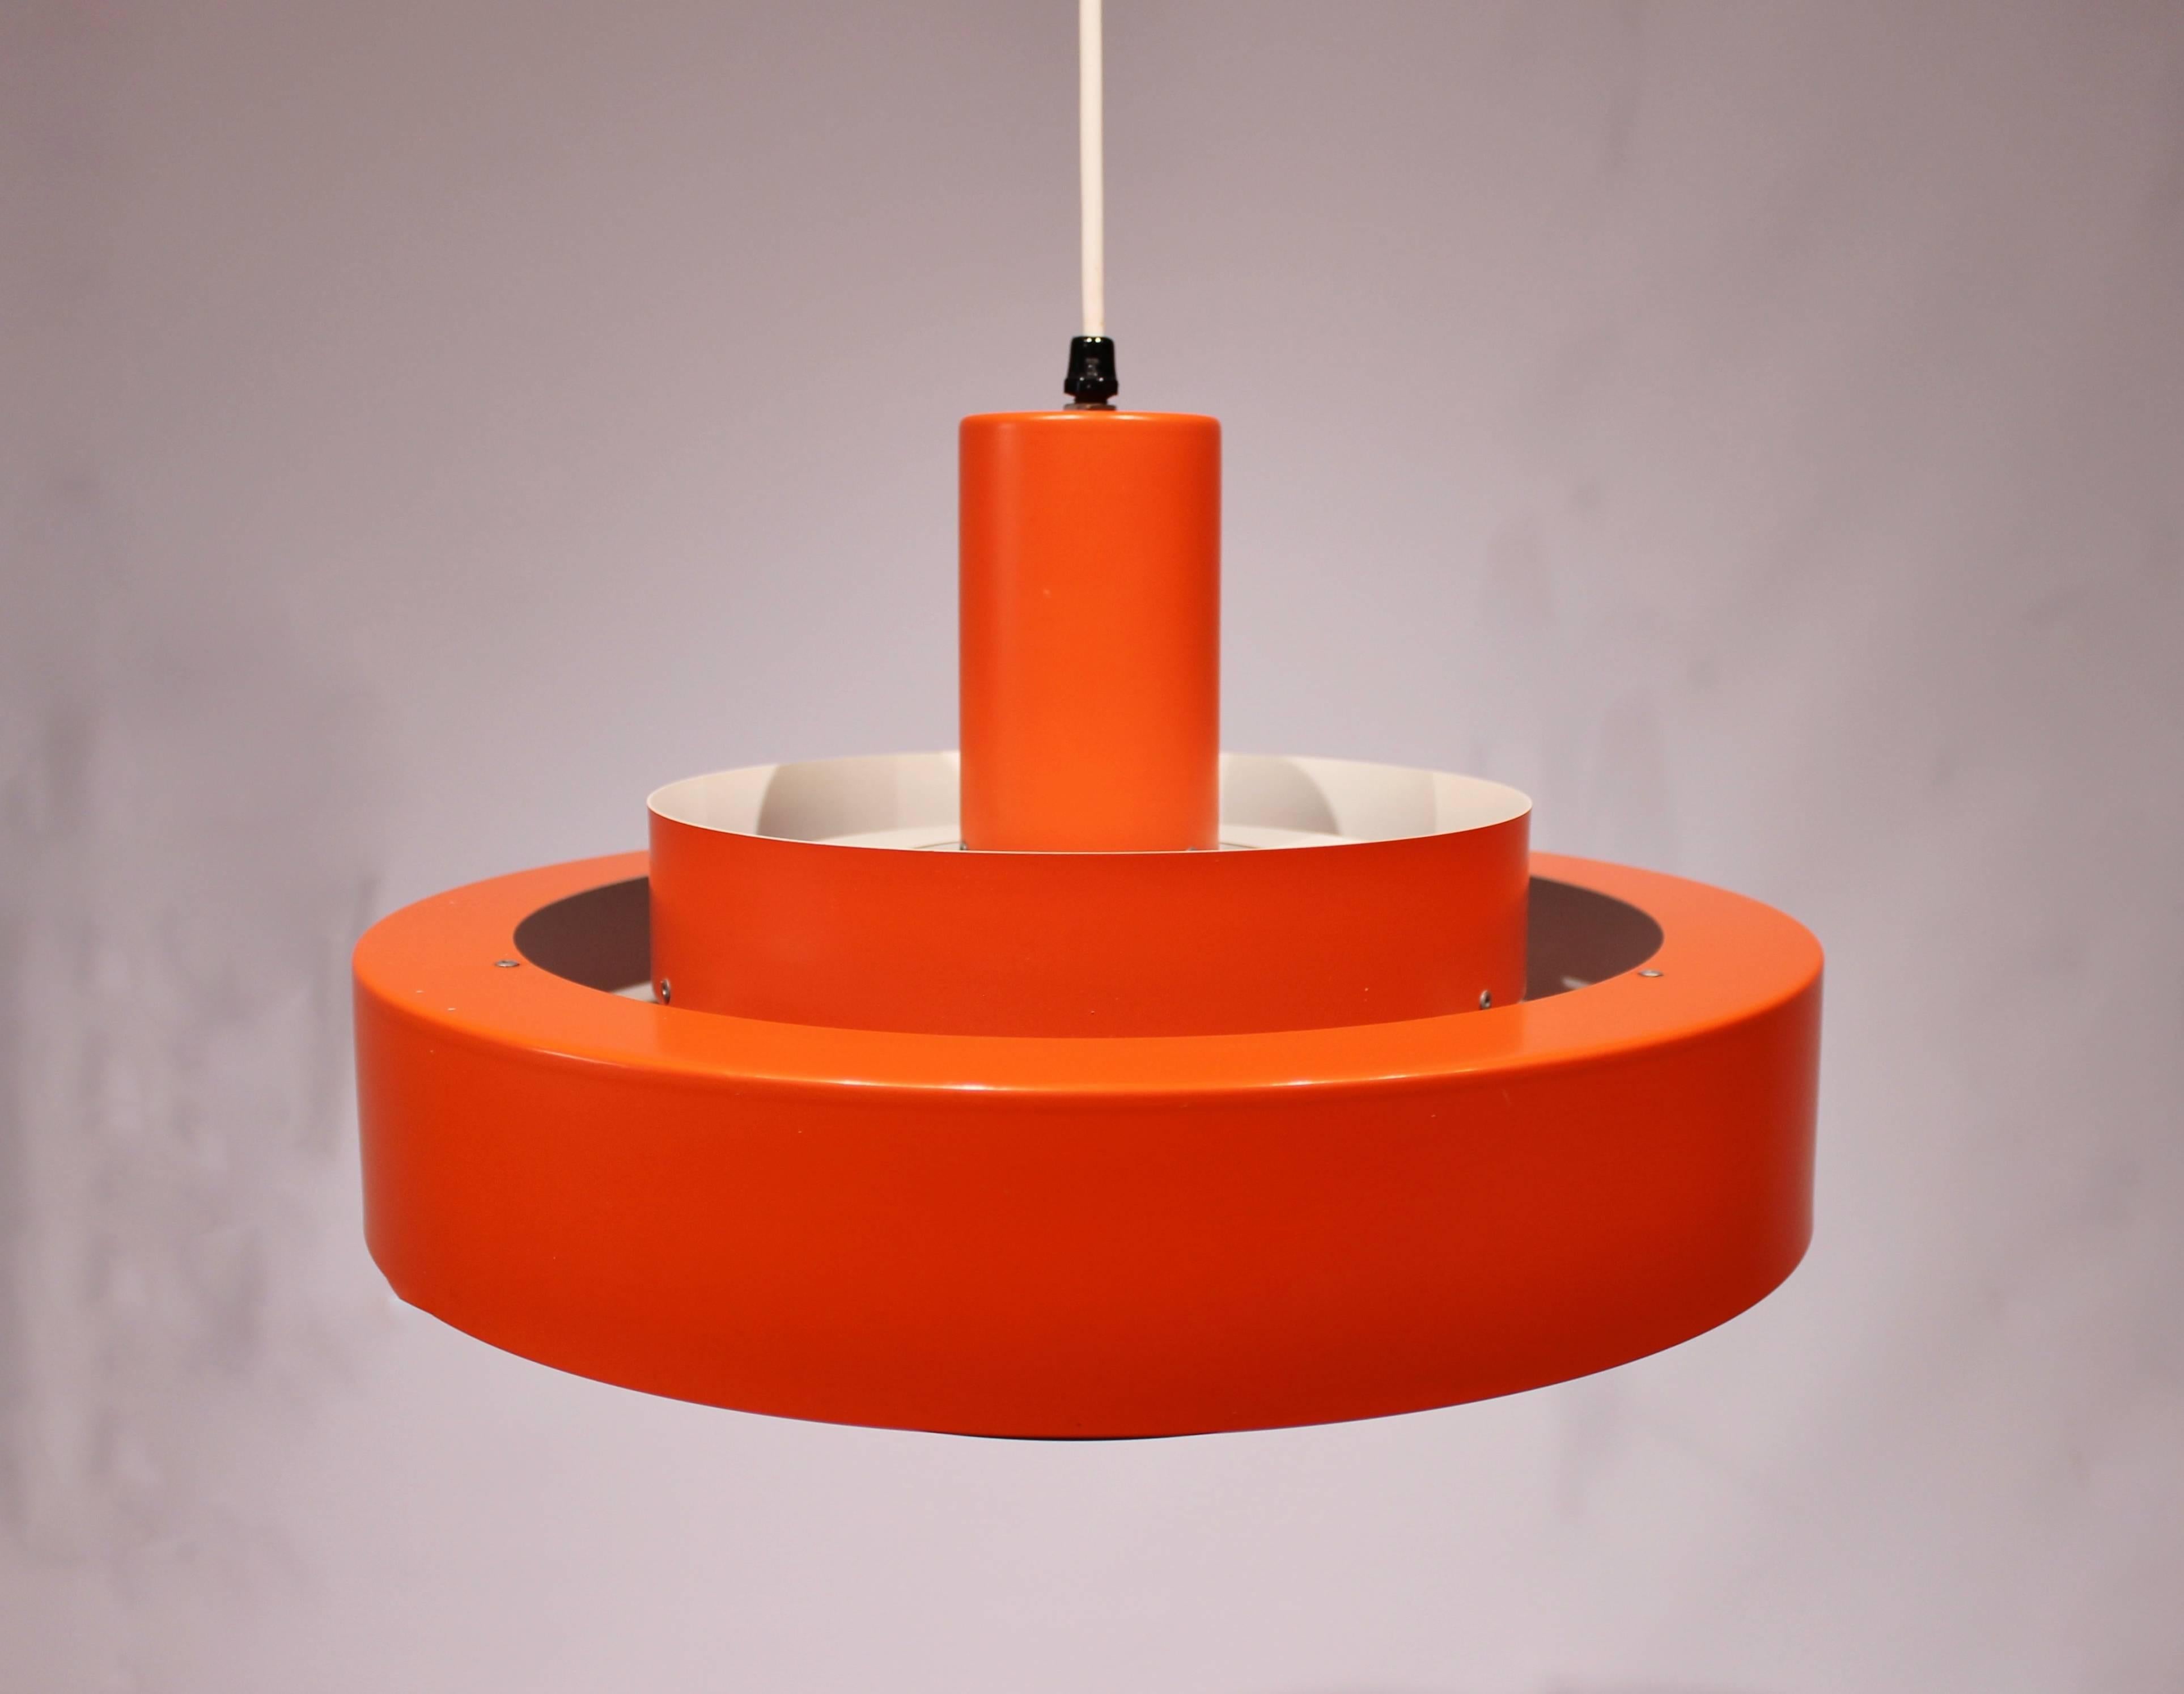 Equator pendant with orange/red lacquered metal shades designed by Jo Hammerborg for Fog and Mørup from the 1960s. The pendant is in great vintage condition.